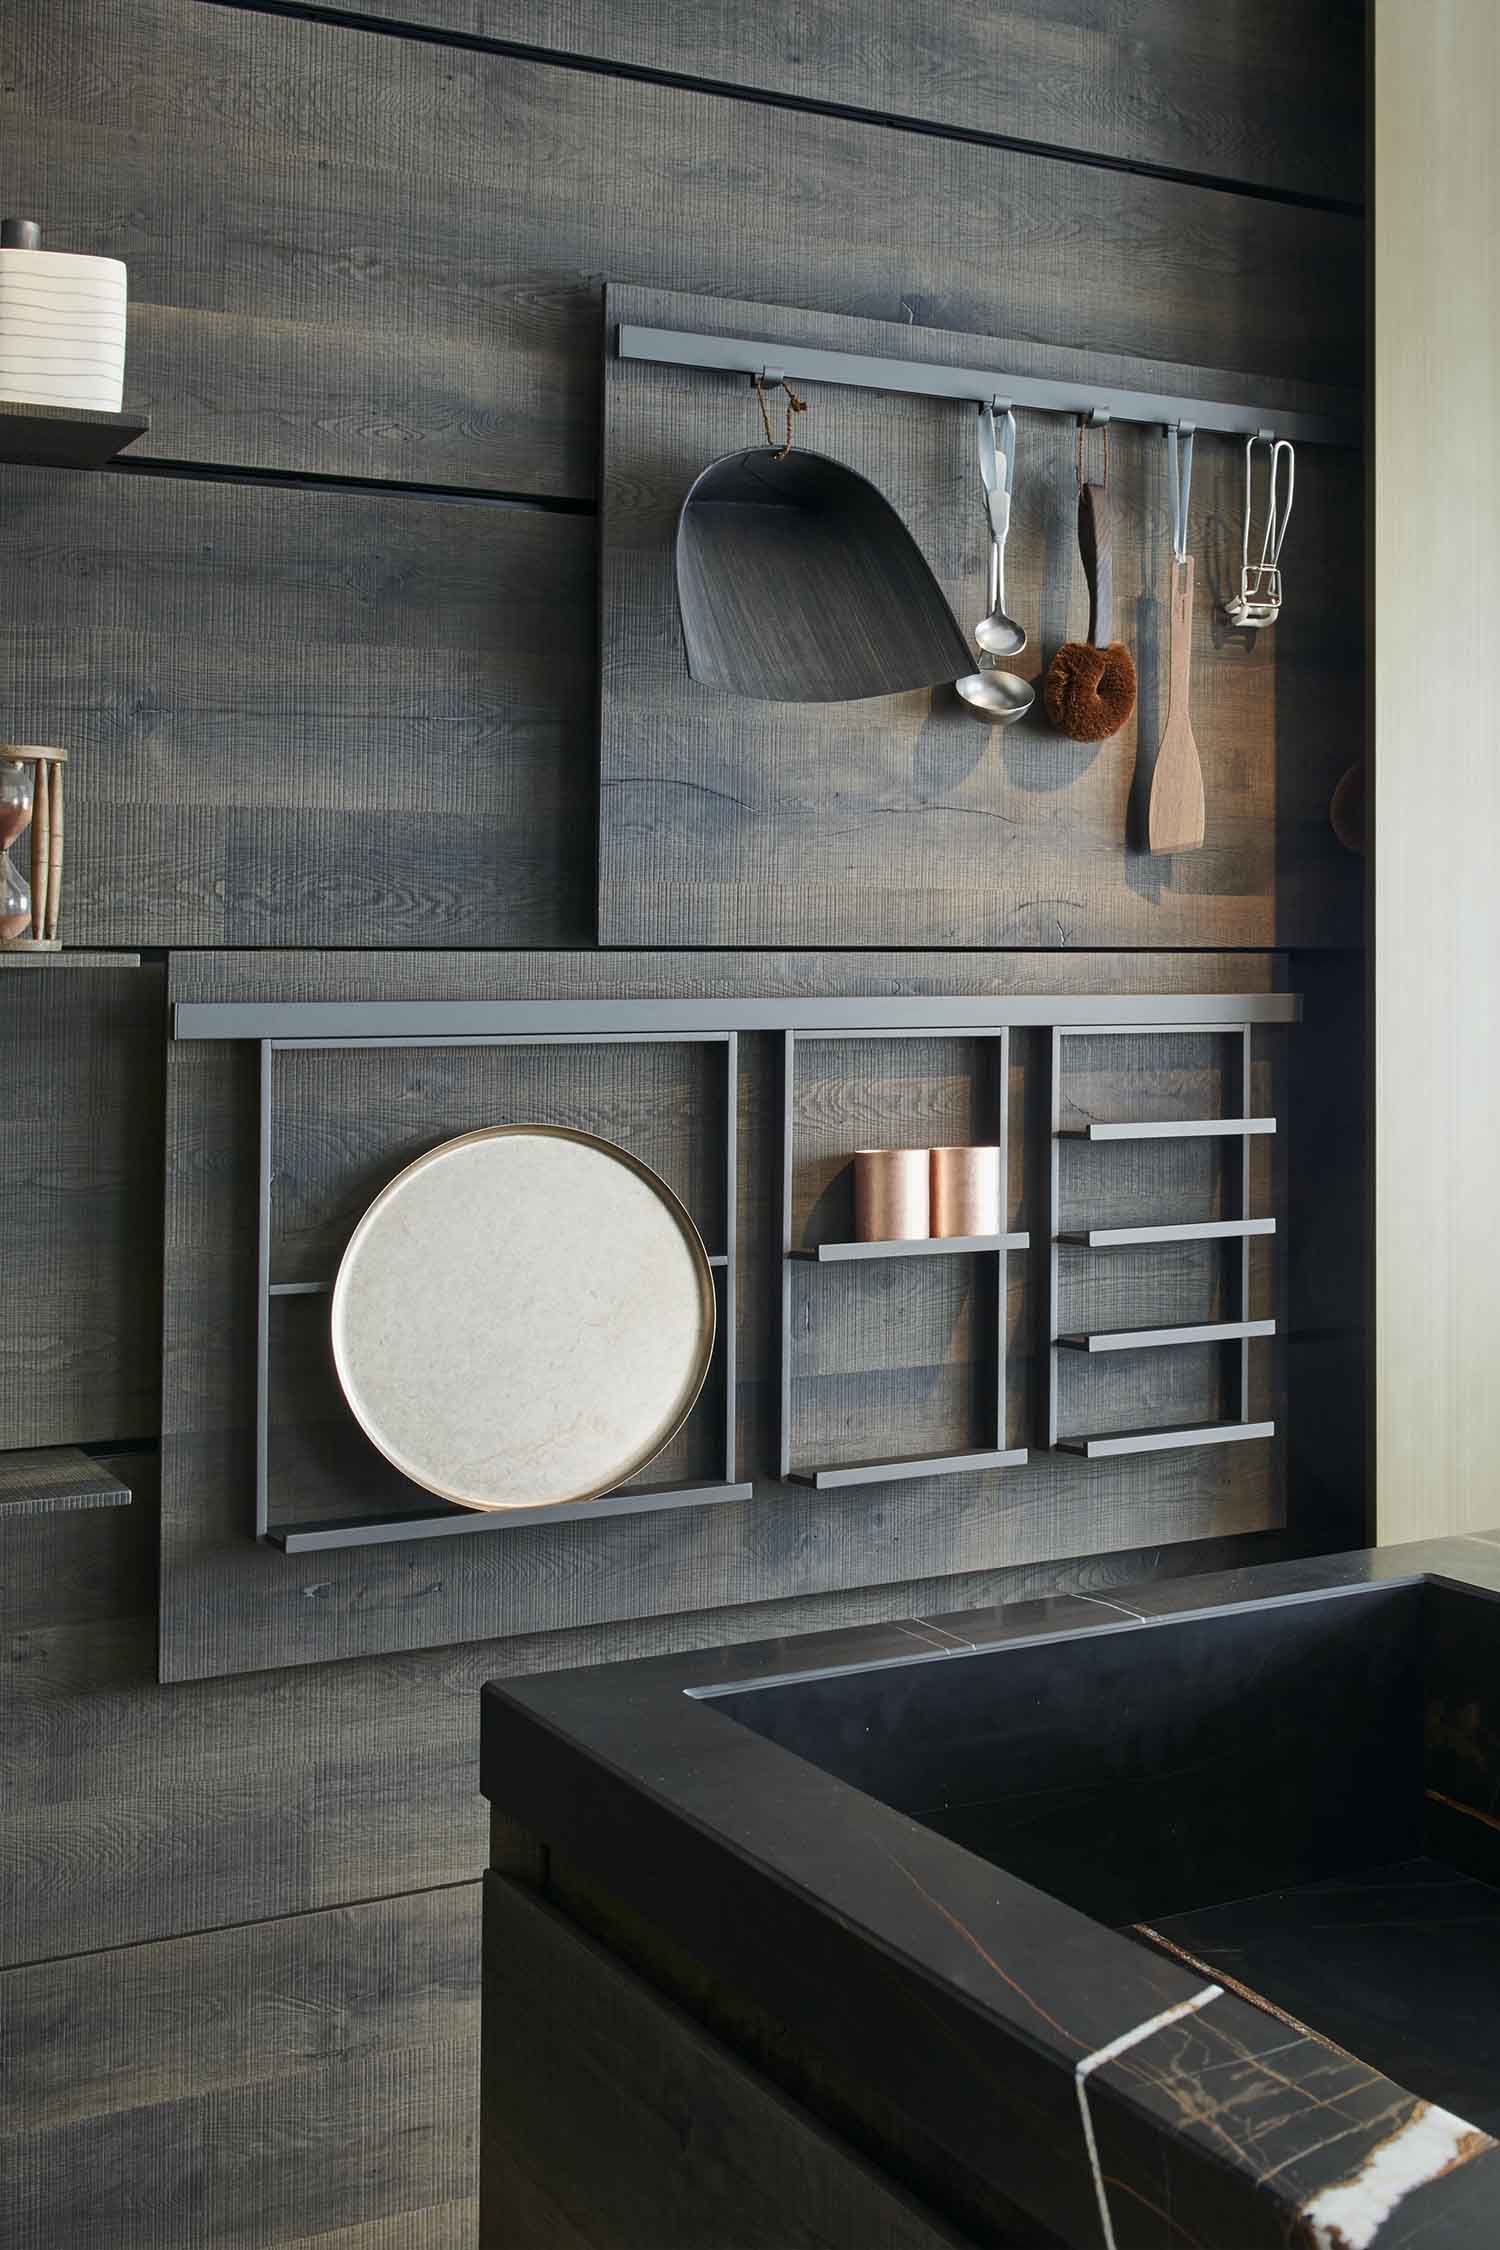 Storage elements pull out from inside the kitchen boiserie in a luxury Italian kitchen